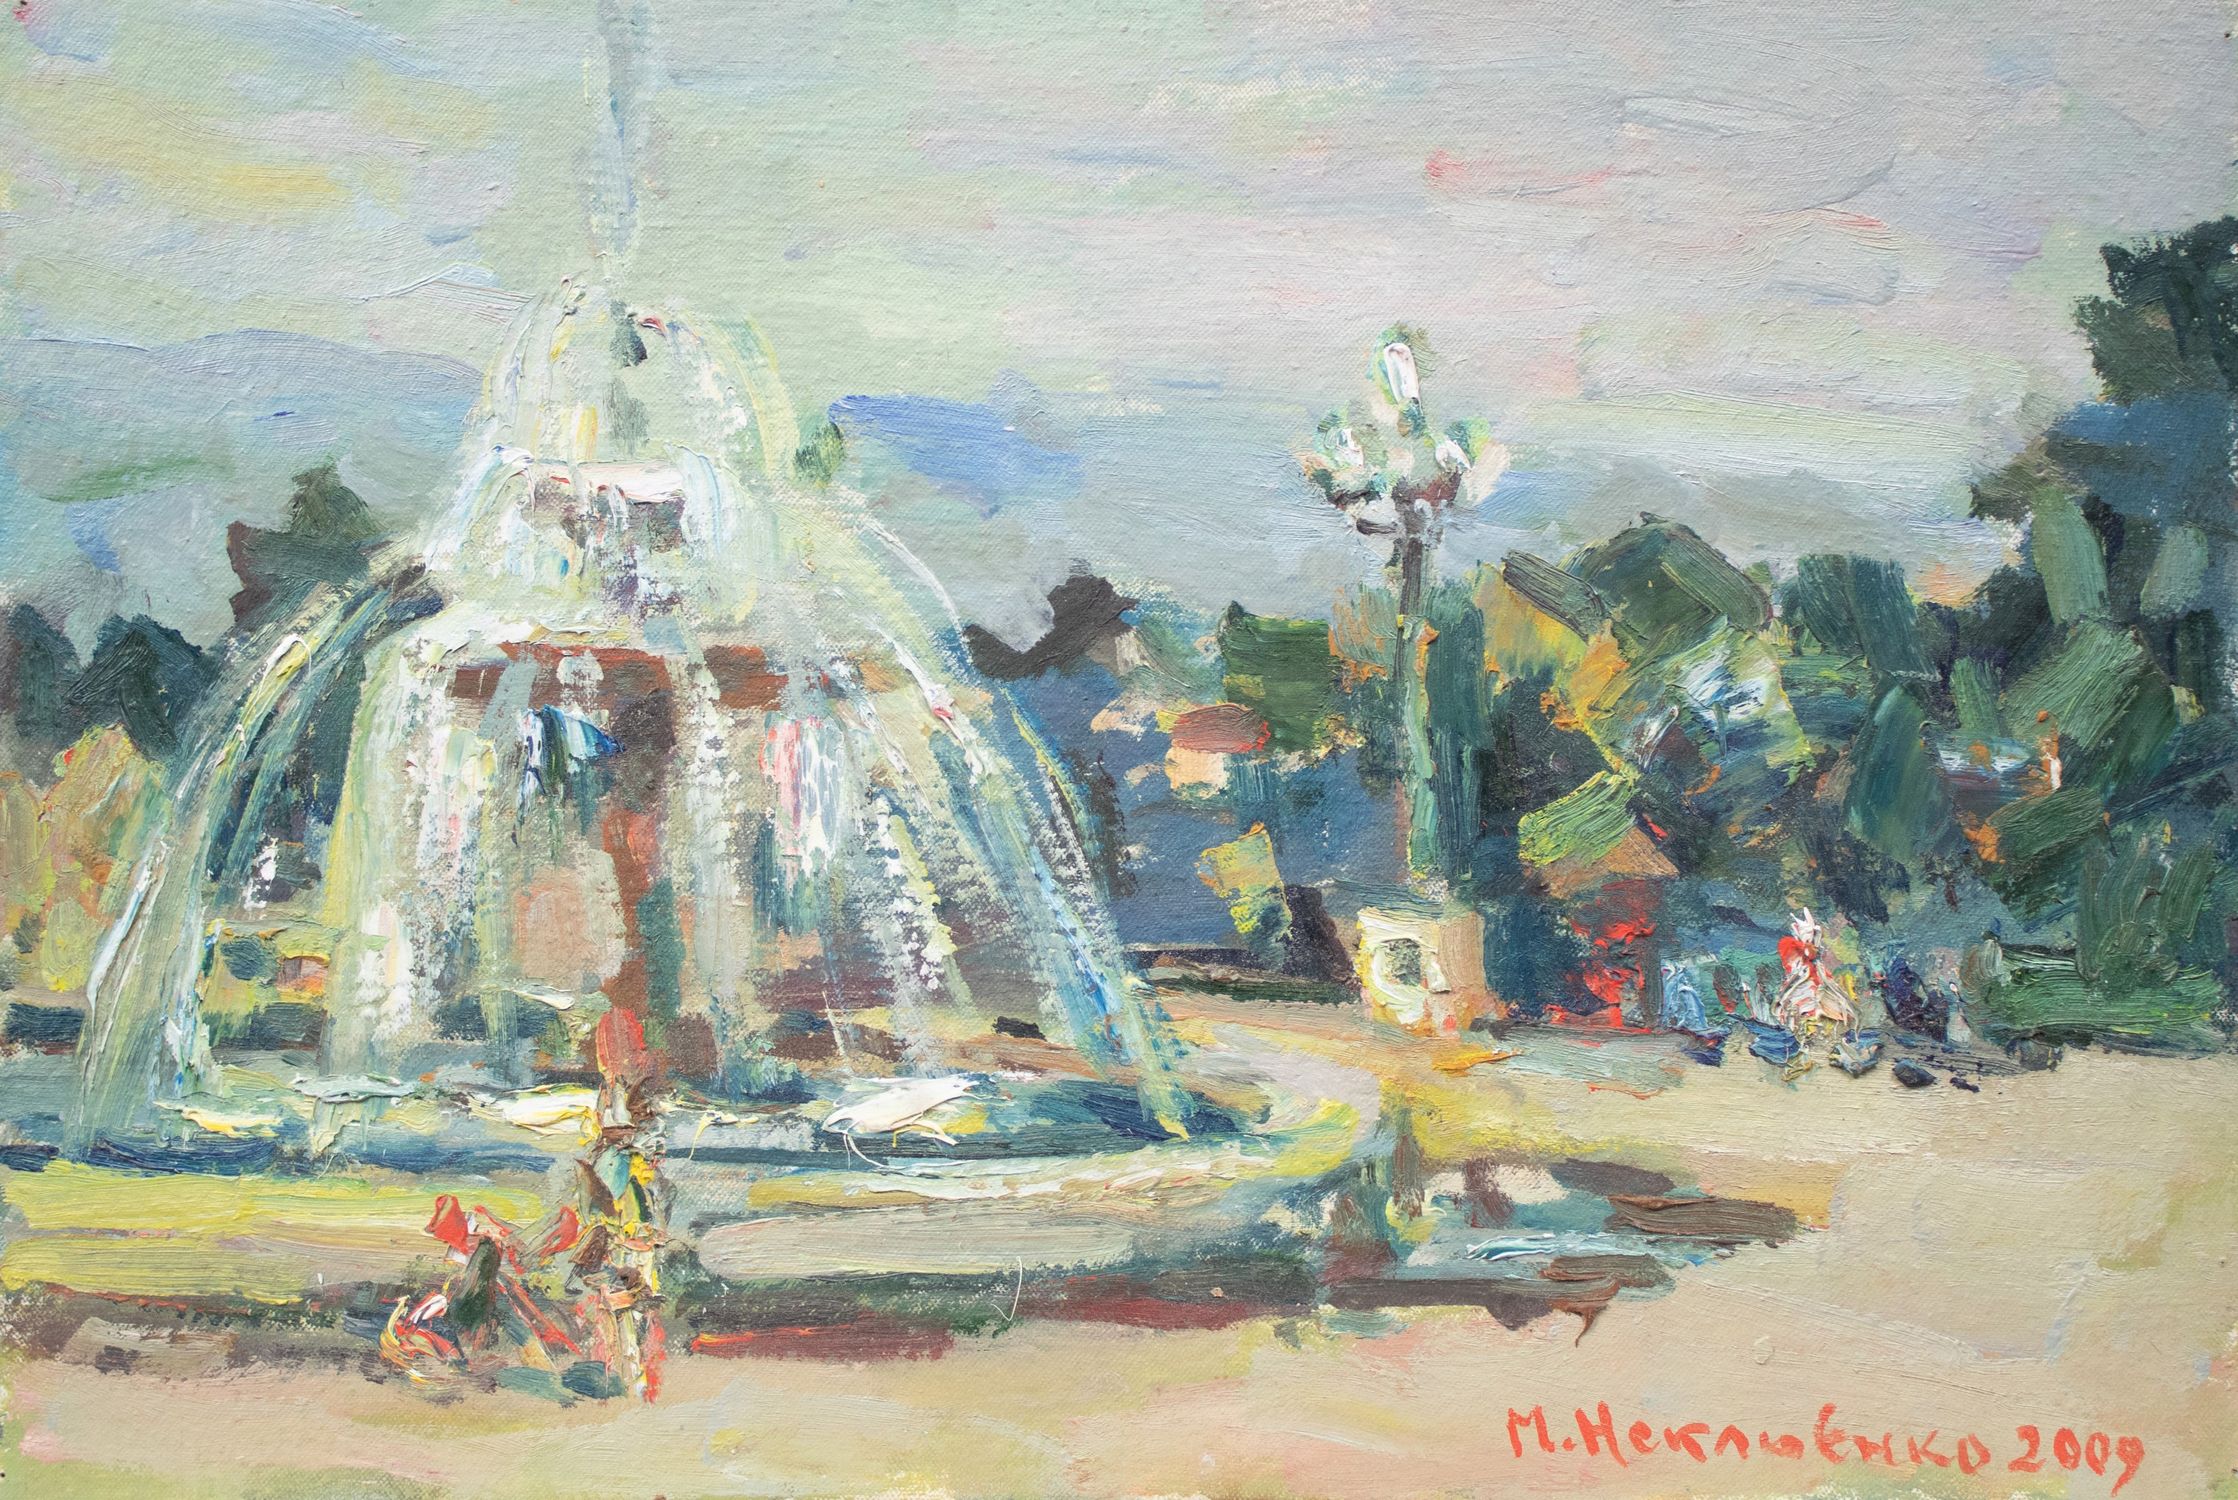 "At the fountain"